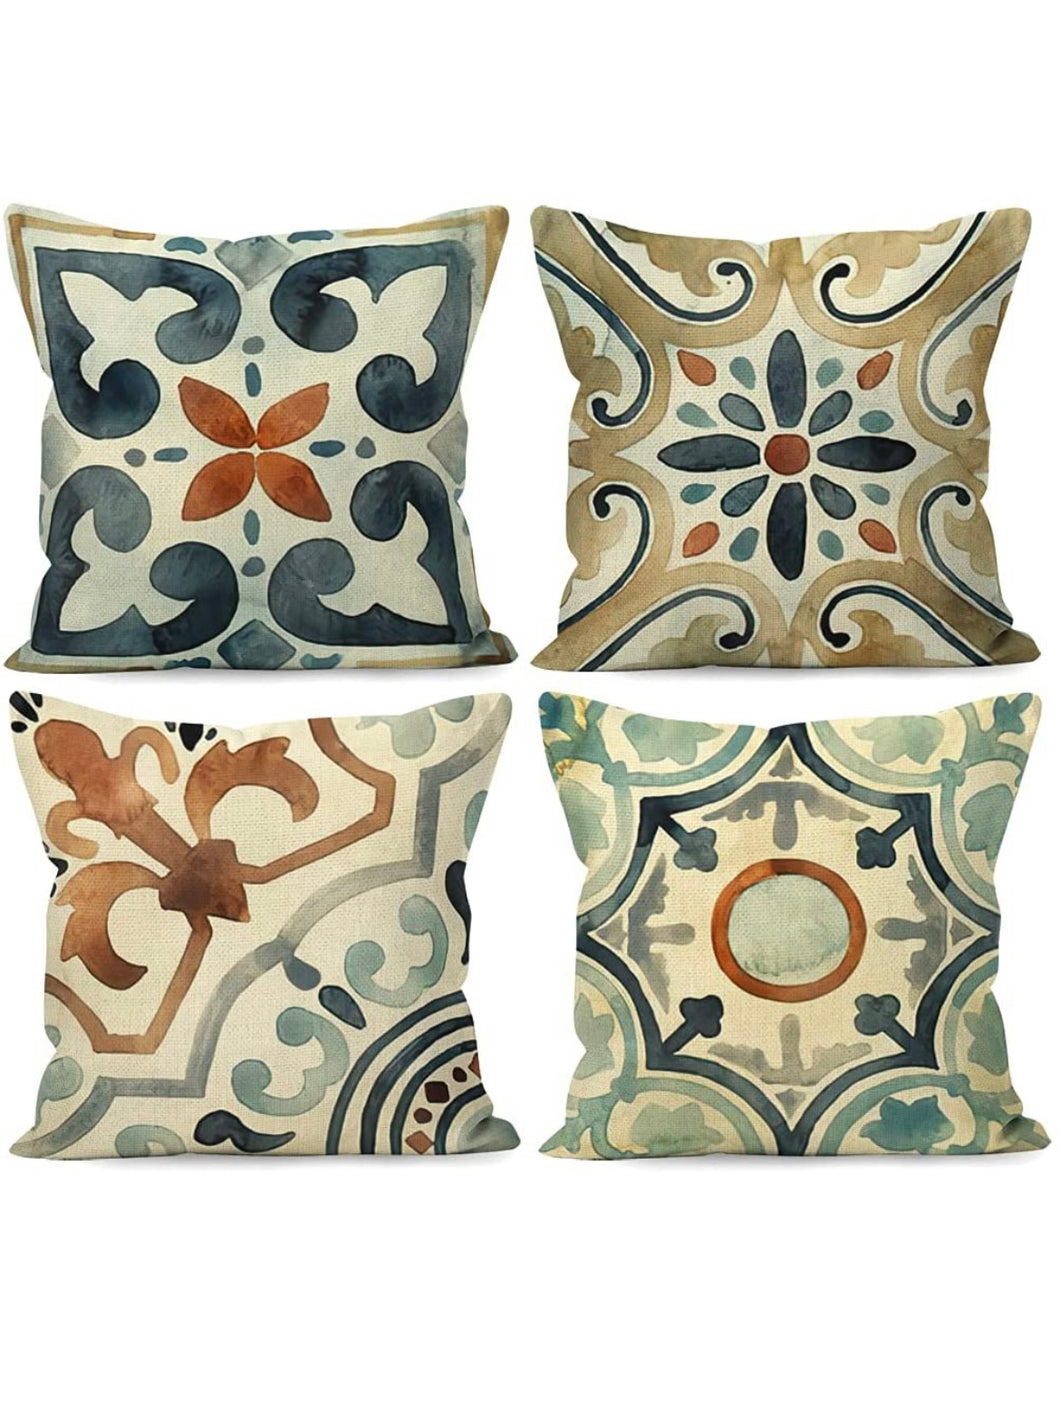 Floral Watercolor Pillow covers